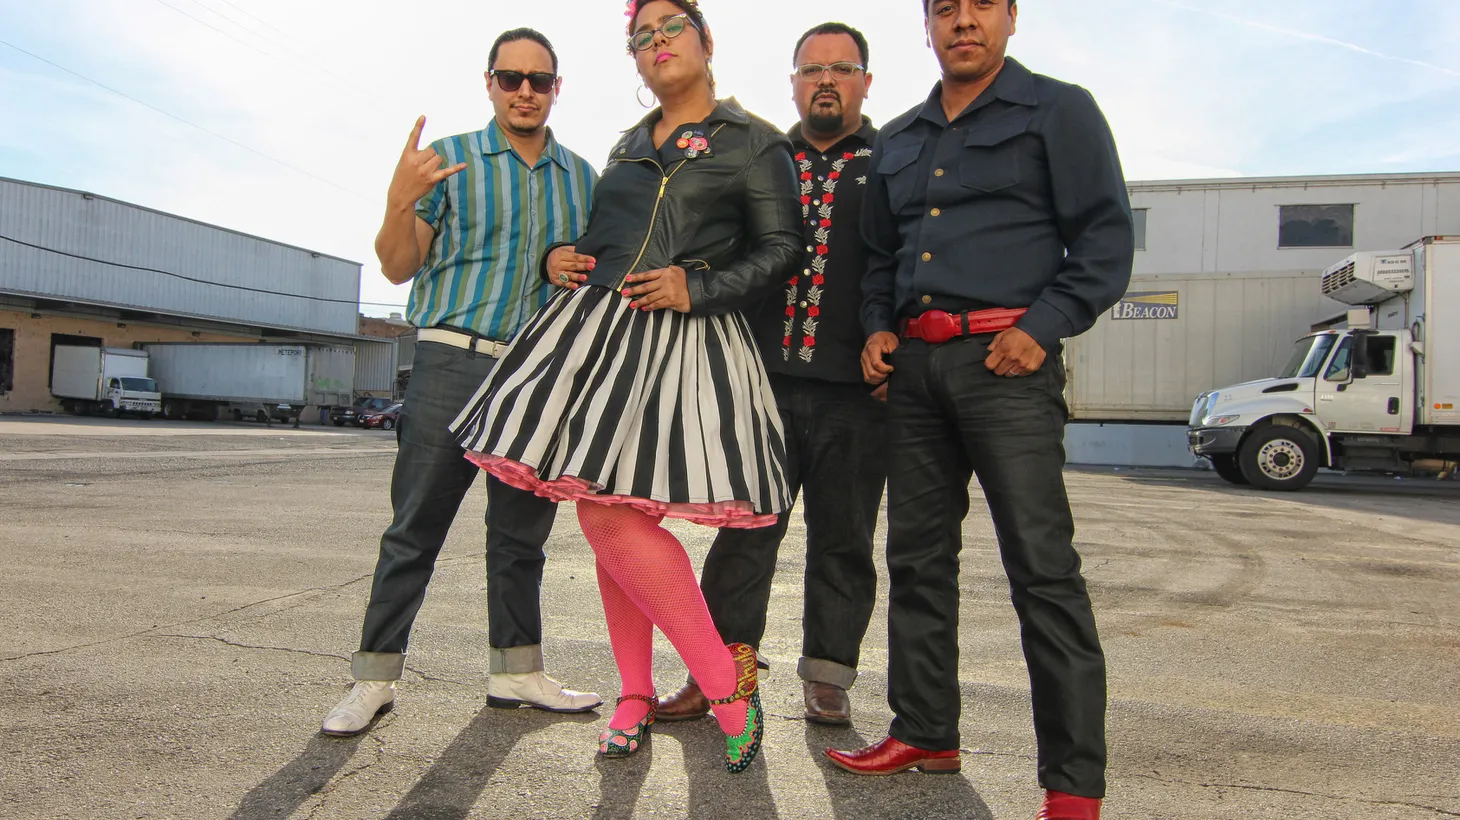 Grammy Award- winning band La Santa Cecilia brought its incredibly energetic live show to our studio.